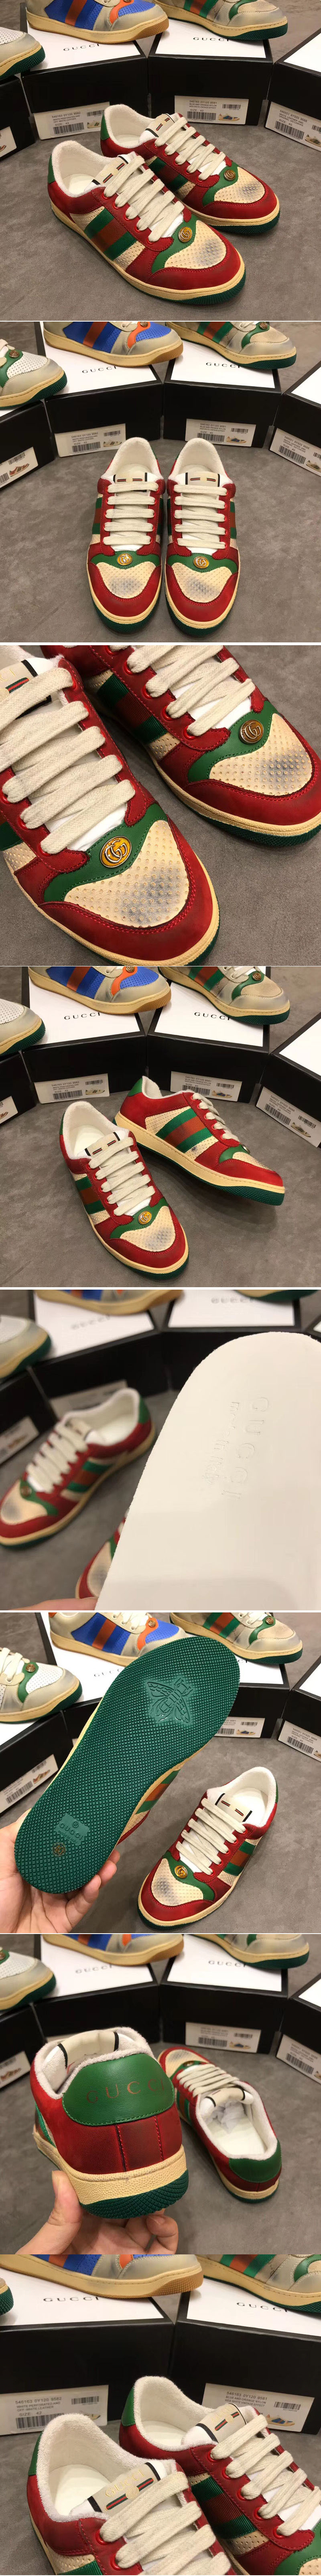 Replica Gucci ‎546163 Screener leather sneaker Red and white leather